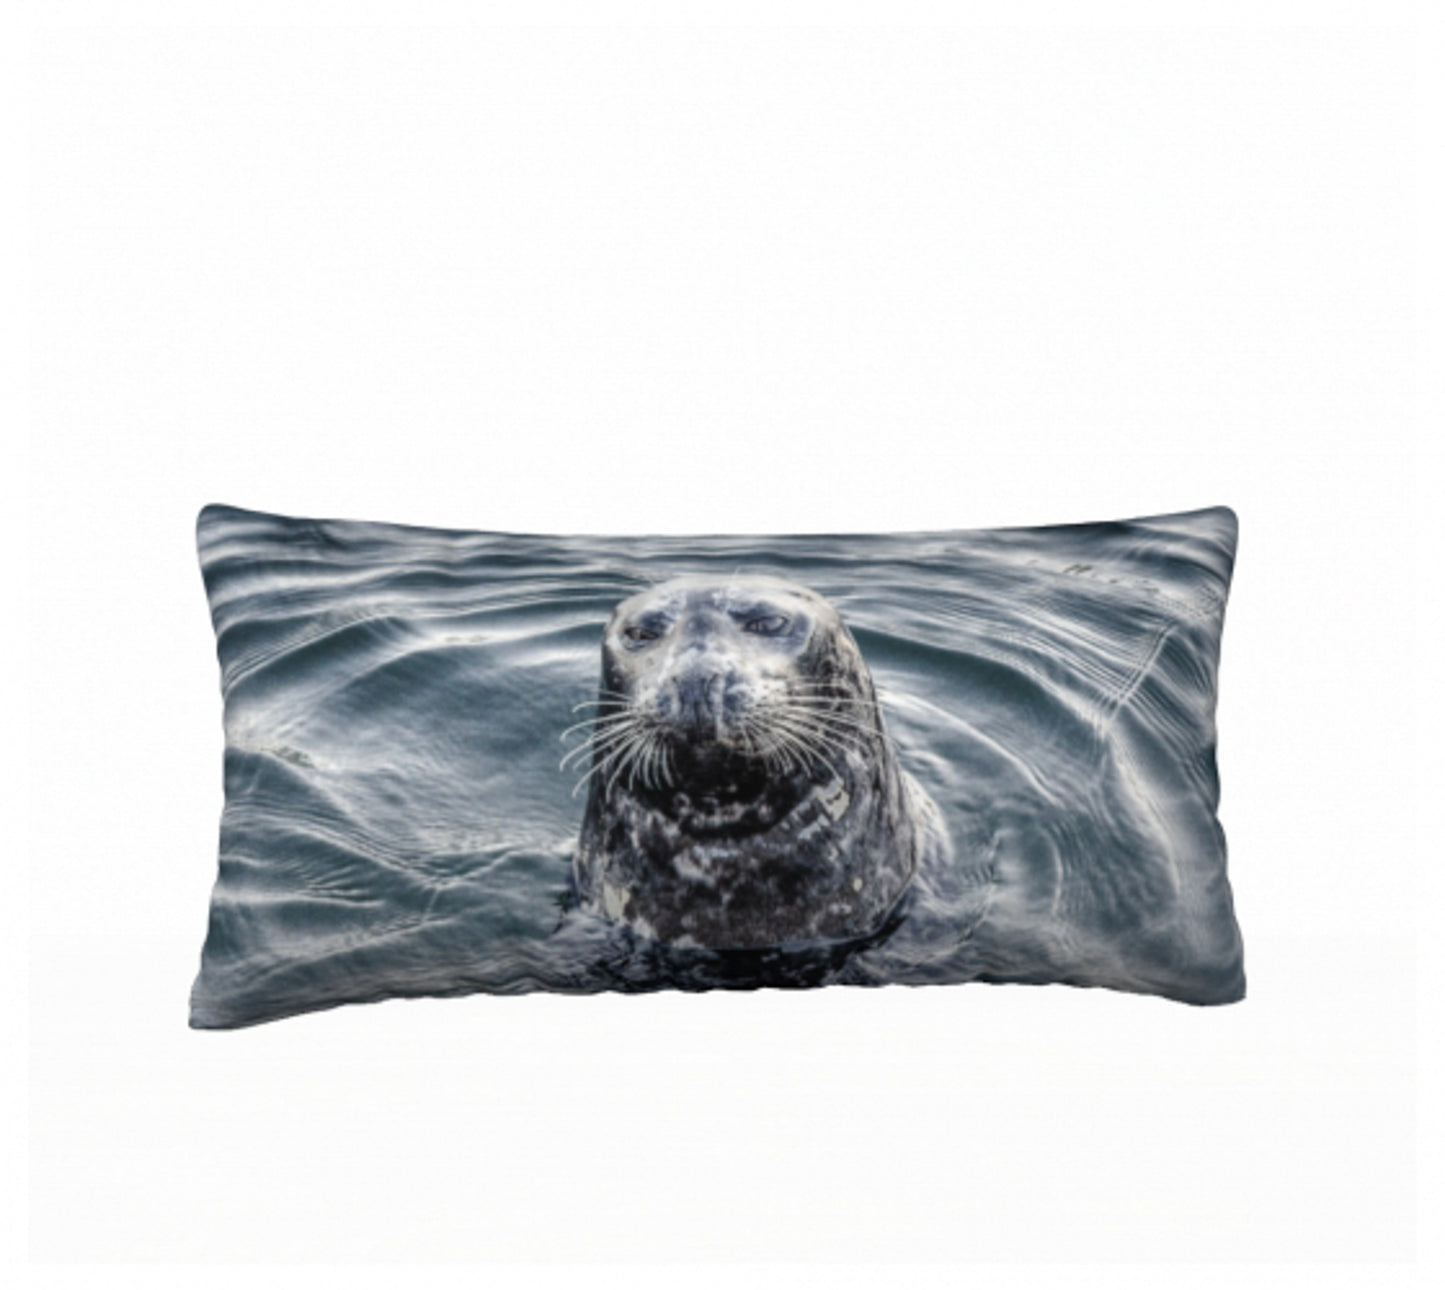 I Love Lucy Seal Vancouver Island 24" x 12" Pillow Case